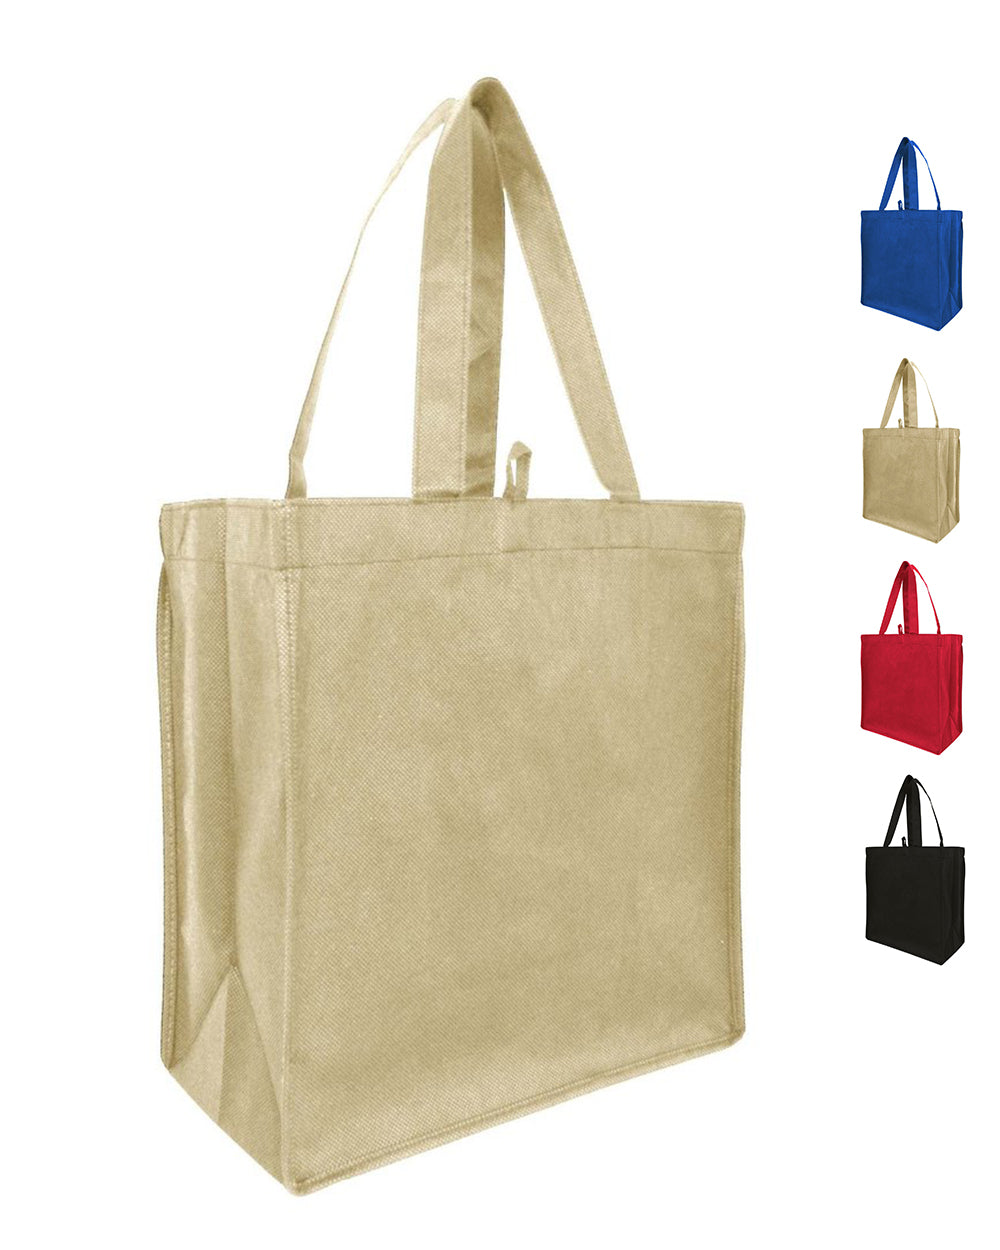 11" Affordable Small Tote Bags with Full Gusset - GN55